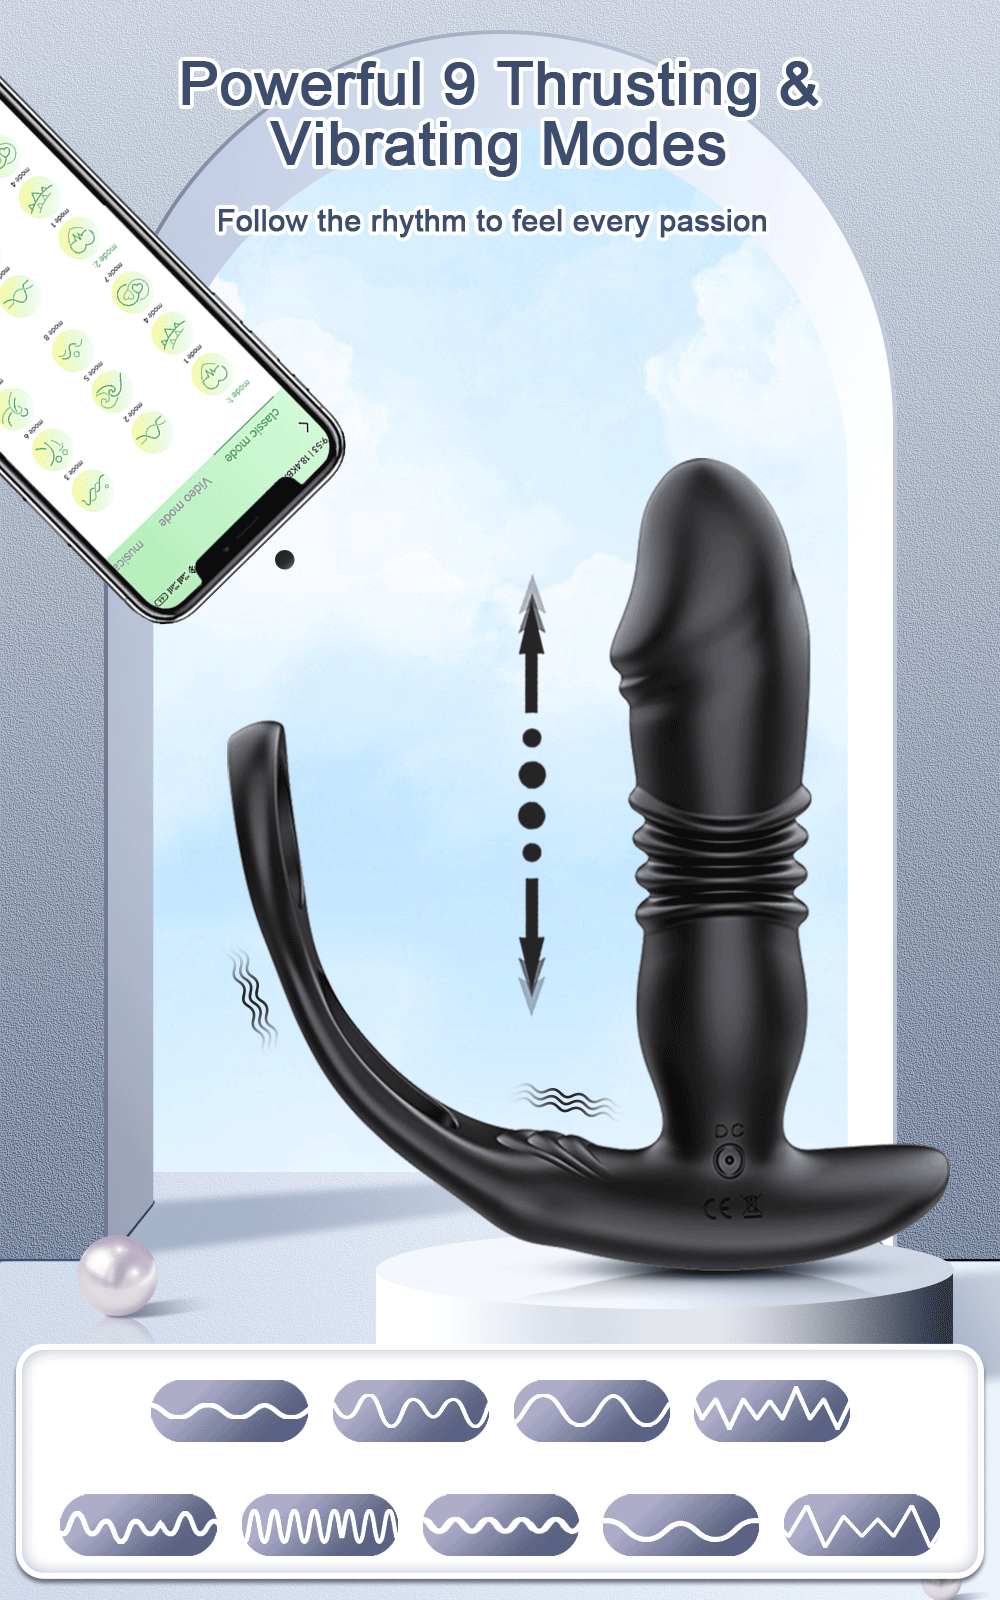 Wholesale from 30 pieces APP Control Telescopic Prostate Massager Butt Plug Anal Vibrator Sex Toys for Men Ass Anal Dildo Men Bluetooth Buttplug 9 Modes S23e241af3f384dc6bc5cb8aa915d7b861